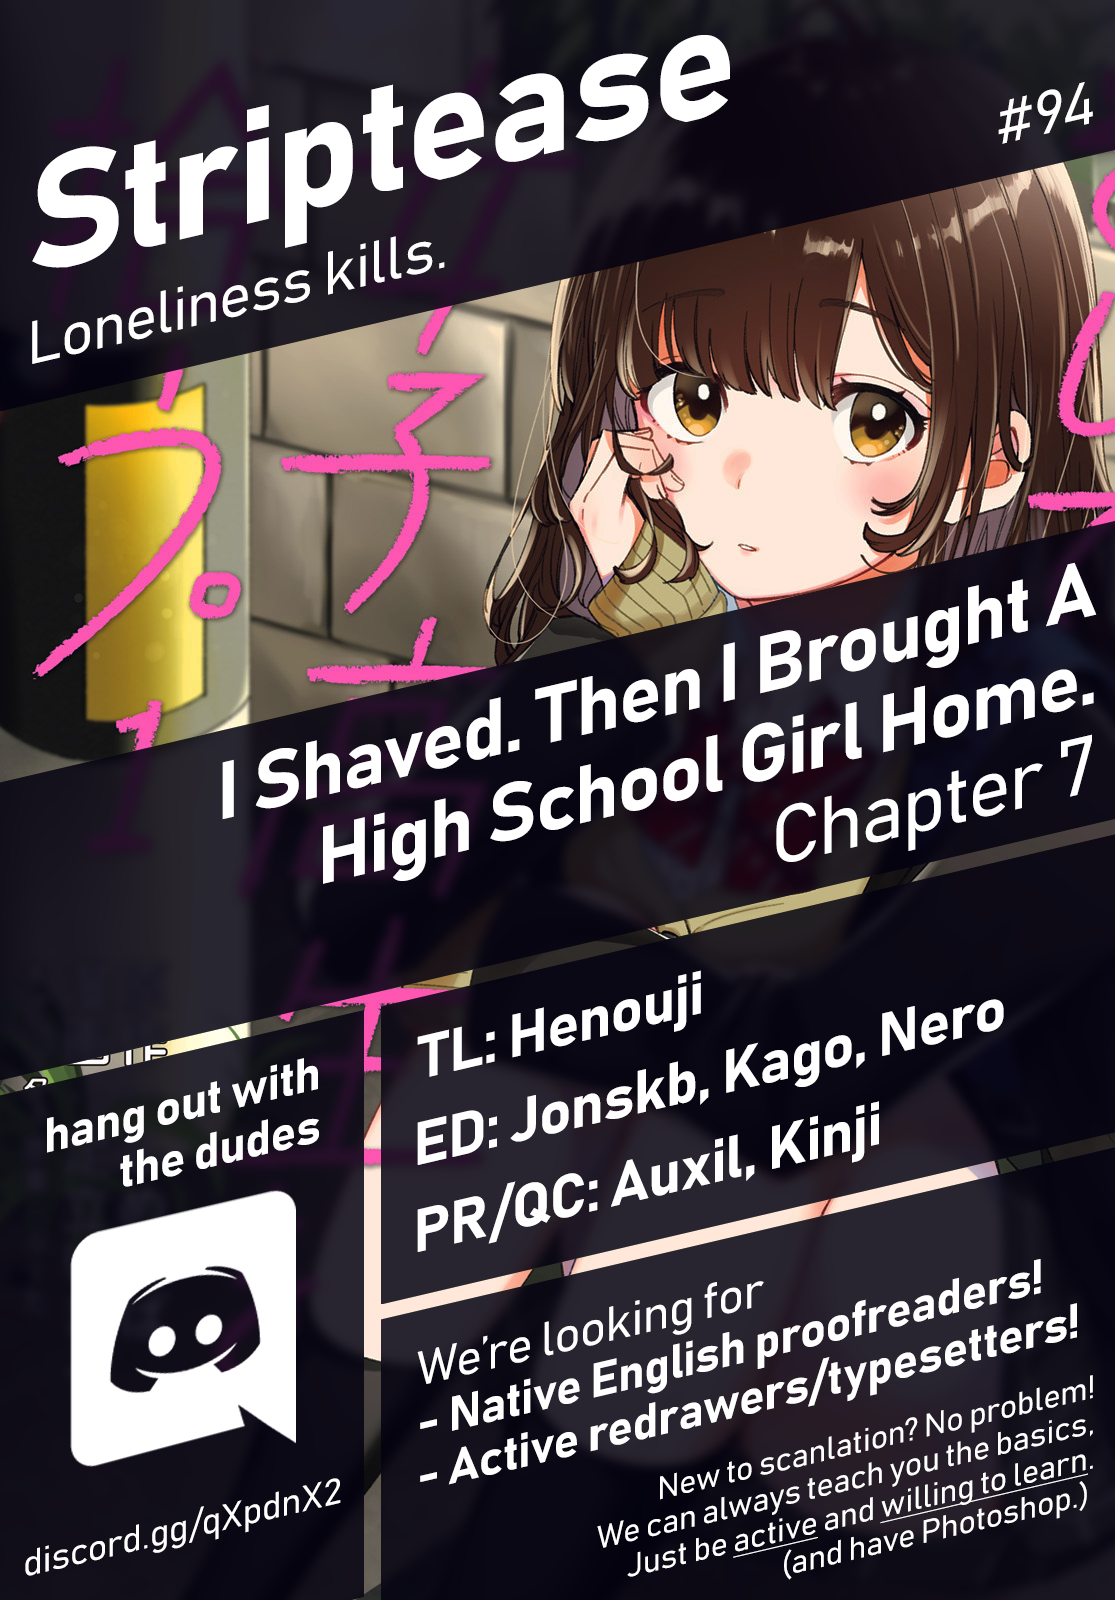 I Shaved. Then I Brought a High School Girl Home. Chapter 7